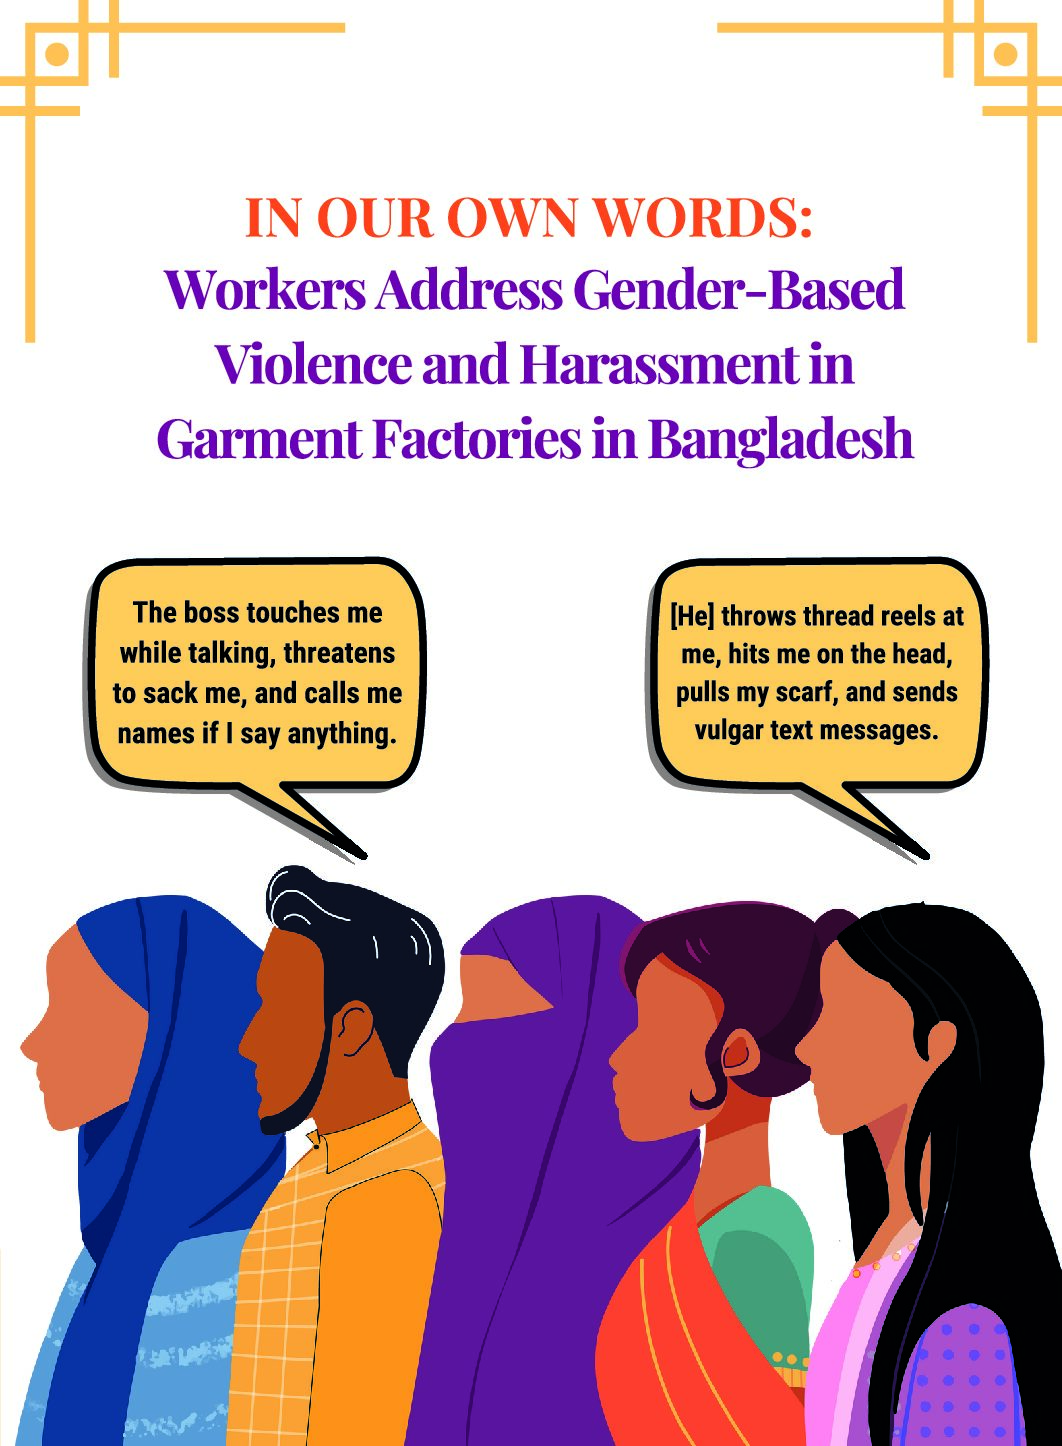 Cover of In Our Own Words: Workers Address Gender-Based Violence and Harassment in Garment Factories in Bangladesh, a report by Solidarity Center